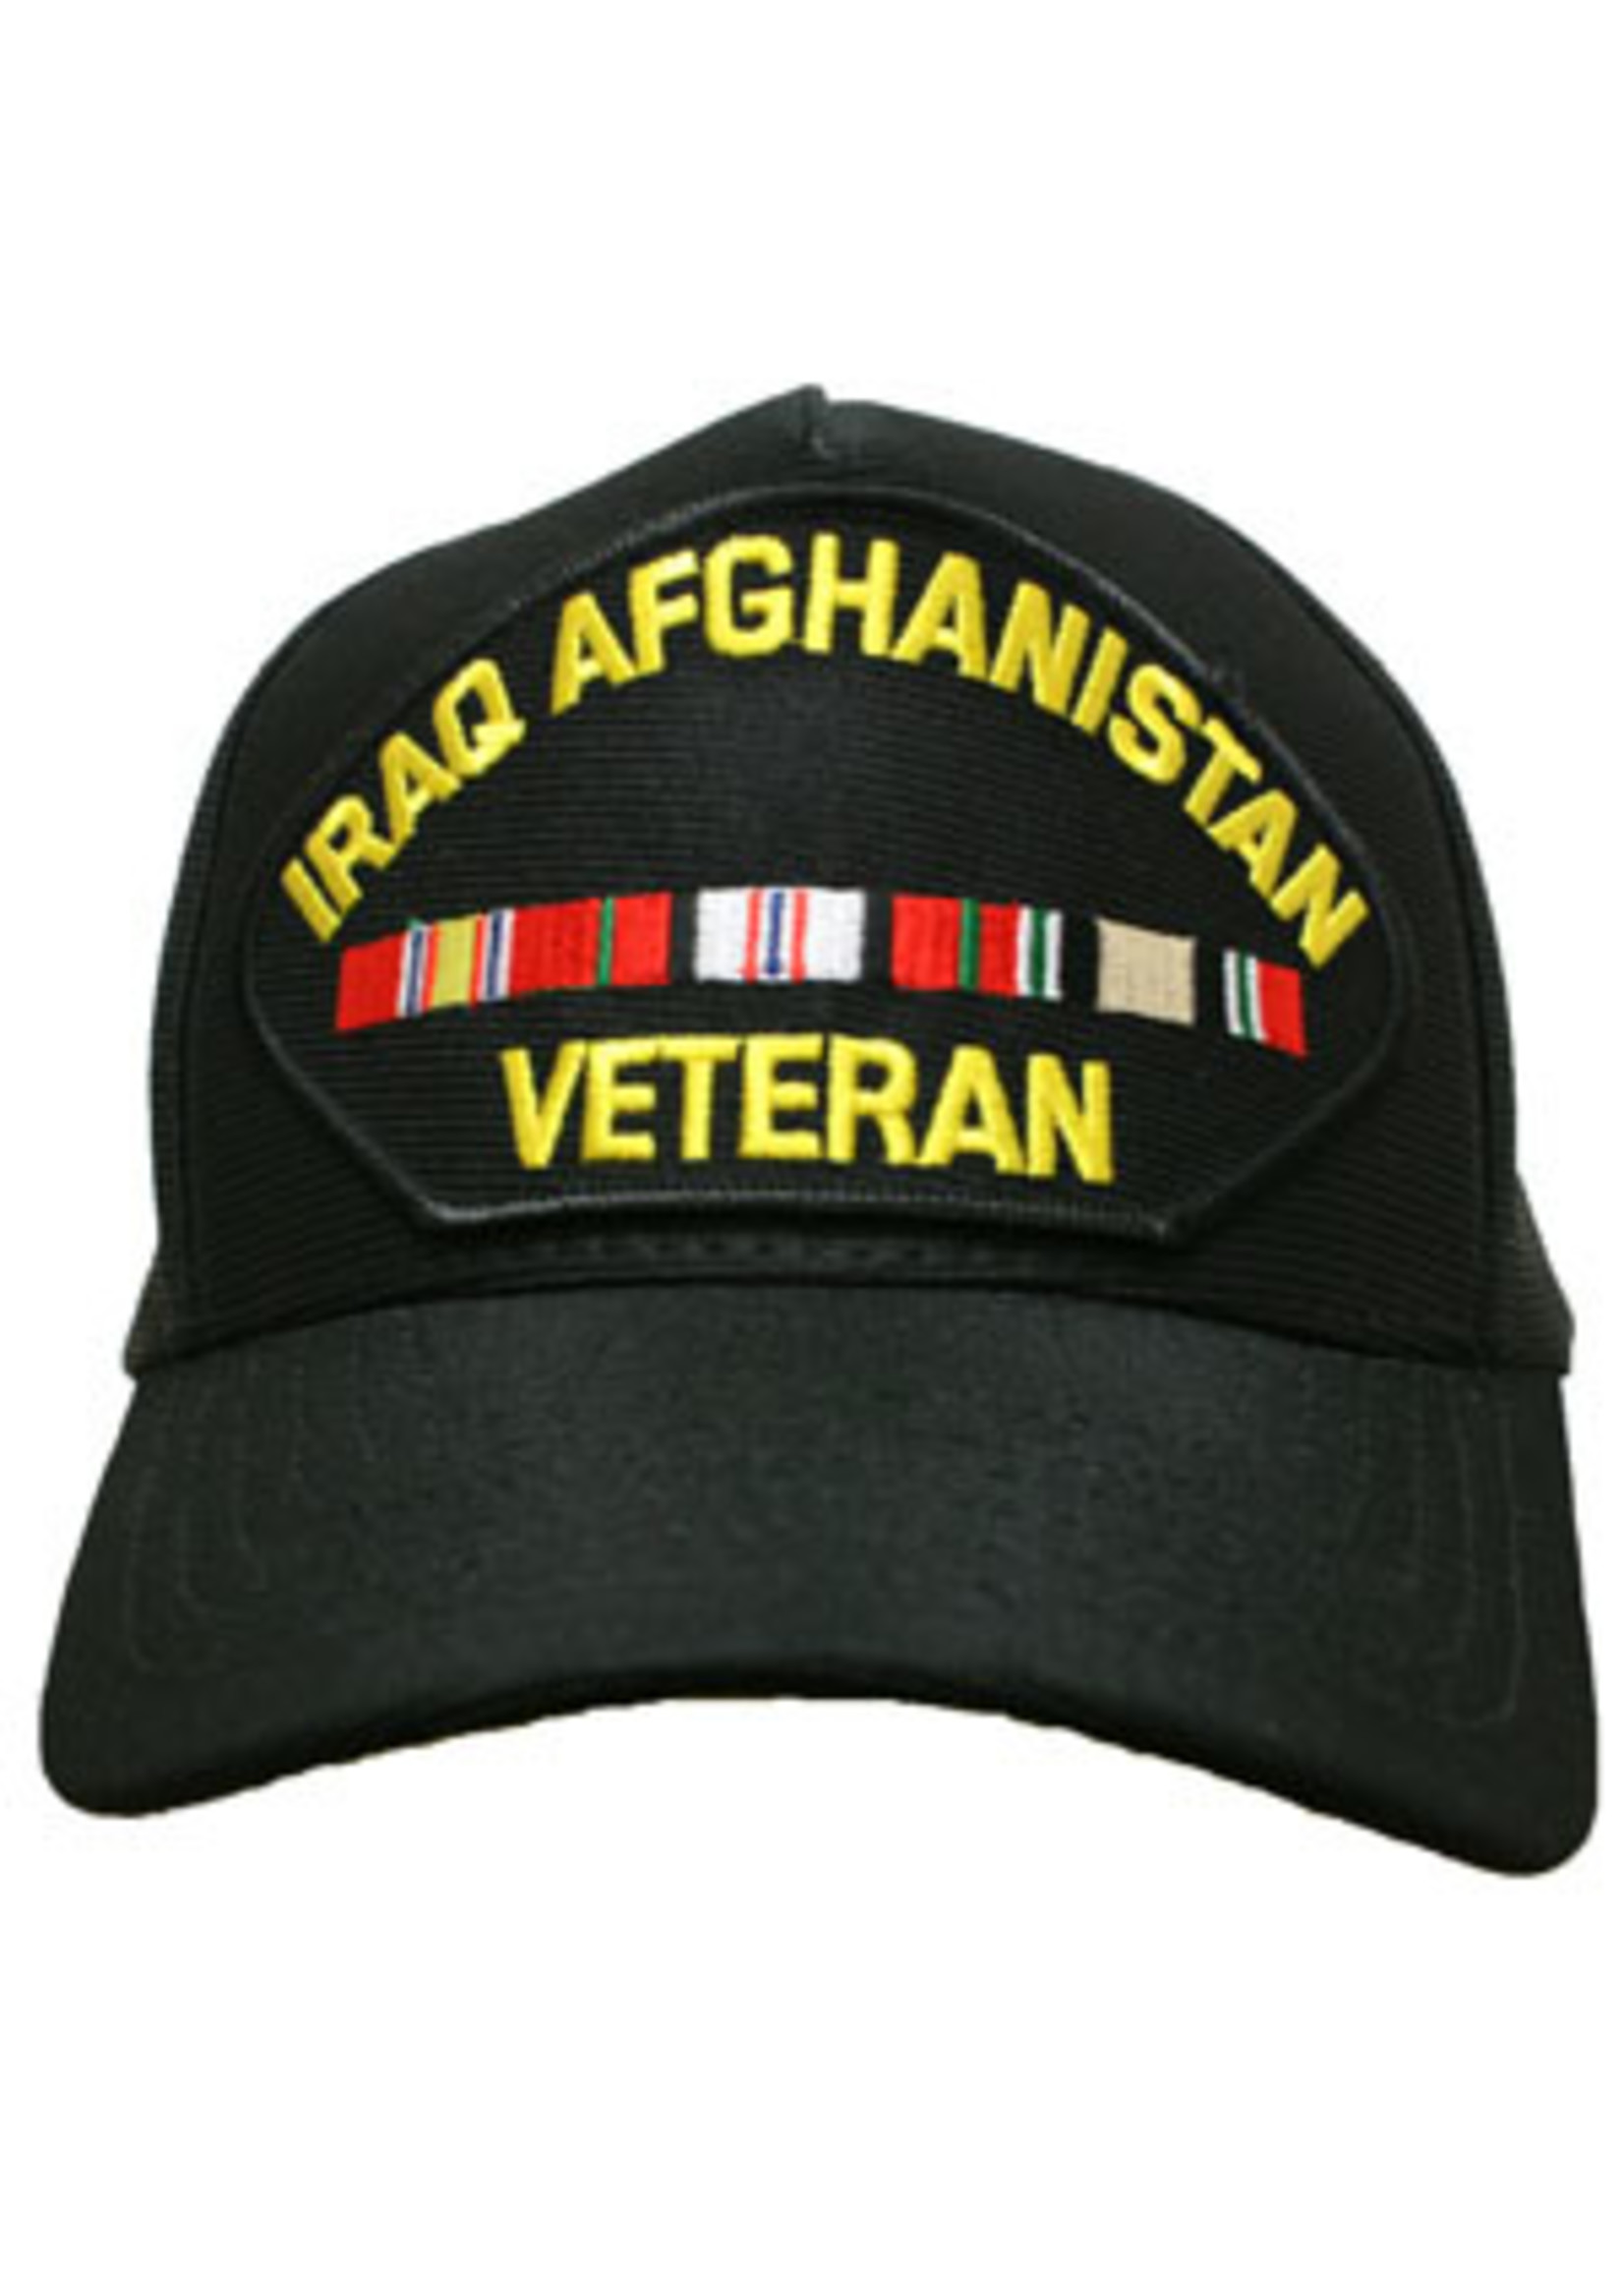 Eagle Crest Cap Iraq Afghanistan Veteran with Ribbons